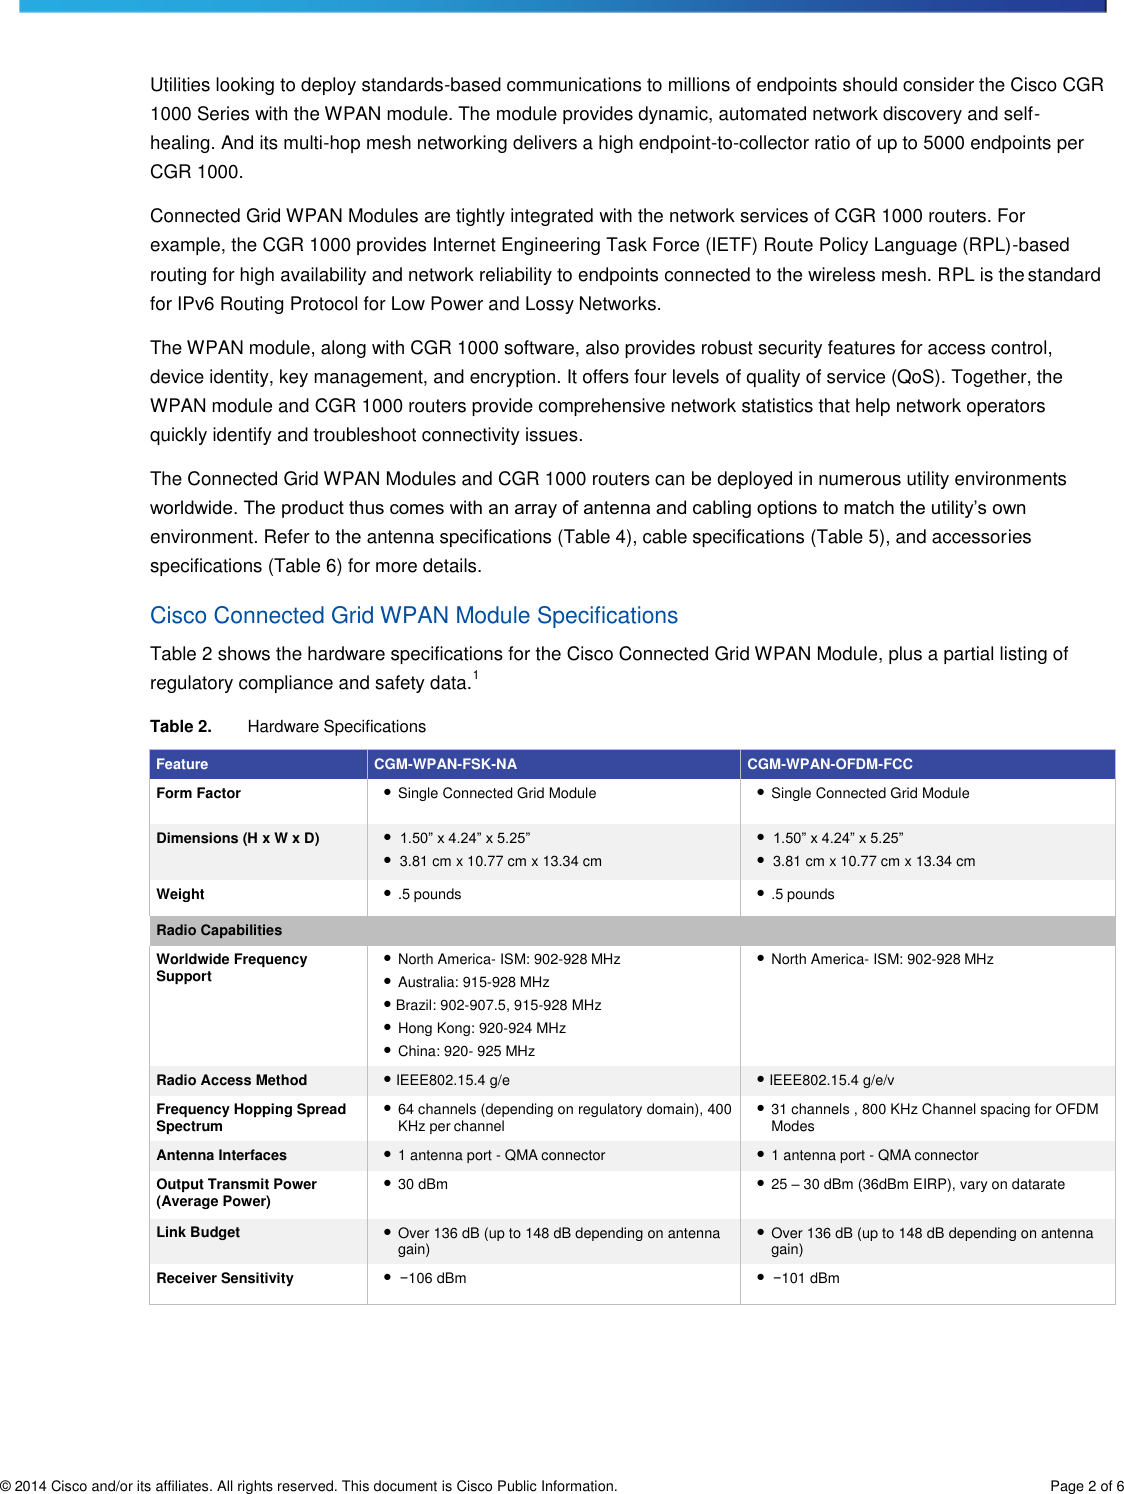 © 2014 Cisco and/or its affiliates. All rights reserved. This document is Cisco Public Information. Page 2 of 6     Utilities looking to deploy standards-based communications to millions of endpoints should consider the Cisco CGR 1000 Series with the WPAN module. The module provides dynamic, automated network discovery and self- healing. And its multi-hop mesh networking delivers a high endpoint-to-collector ratio of up to 5000 endpoints per CGR 1000. Connected Grid WPAN Modules are tightly integrated with the network services of CGR 1000 routers. For example, the CGR 1000 provides Internet Engineering Task Force (IETF) Route Policy Language (RPL)-based routing for high availability and network reliability to endpoints connected to the wireless mesh. RPL is the standard for IPv6 Routing Protocol for Low Power and Lossy Networks. The WPAN module, along with CGR 1000 software, also provides robust security features for access control, device identity, key management, and encryption. It offers four levels of quality of service (QoS). Together, the WPAN module and CGR 1000 routers provide comprehensive network statistics that help network operators quickly identify and troubleshoot connectivity issues. The Connected Grid WPAN Modules and CGR 1000 routers can be deployed in numerous utility environments worldwide. The product thus comes with an array of antenna and cabling options to match the utility’s own environment. Refer to the antenna specifications (Table 4), cable specifications (Table 5), and accessories specifications (Table 6) for more details. Cisco Connected Grid WPAN Module Specifications Table 2 shows the hardware specifications for the Cisco Connected Grid WPAN Module, plus a partial listing of regulatory compliance and safety data.1 Table 2. Hardware Specifications  Feature CGM-WPAN-FSK-NA CGM-WPAN-OFDM-FCC Form Factor ● Single Connected Grid Module ● Single Connected Grid Module Dimensions (H x W x D) ●  1.50” x 4.24” x 5.25” ●  3.81 cm x 10.77 cm x 13.34 cm ●  1.50” x 4.24” x 5.25” ●  3.81 cm x 10.77 cm x 13.34 cm Weight ● .5 pounds ● .5 pounds Radio Capabilities  Worldwide Frequency Support ● North America- ISM: 902-928 MHz ● Australia: 915-928 MHz ● Brazil: 902-907.5, 915-928 MHz ● Hong Kong: 920-924 MHz ● China: 920- 925 MHz ● North America- ISM: 902-928 MHz  Radio Access Method ● IEEE802.15.4 g/e ● IEEE802.15.4 g/e/v Frequency Hopping Spread Spectrum ● 64 channels (depending on regulatory domain), 400 KHz per channel ● 31 channels , 800 KHz Channel spacing for OFDM Modes Antenna Interfaces ● 1 antenna port - QMA connector ● 1 antenna port - QMA connector Output Transmit Power (Average Power) ● 30 dBm ● 25 – 30 dBm (36dBm EIRP), vary on datarate Link Budget ● Over 136 dB (up to 148 dB depending on antenna gain) ● Over 136 dB (up to 148 dB depending on antenna gain) Receiver Sensitivity ●  −106 dBm ●  −101 dBm 